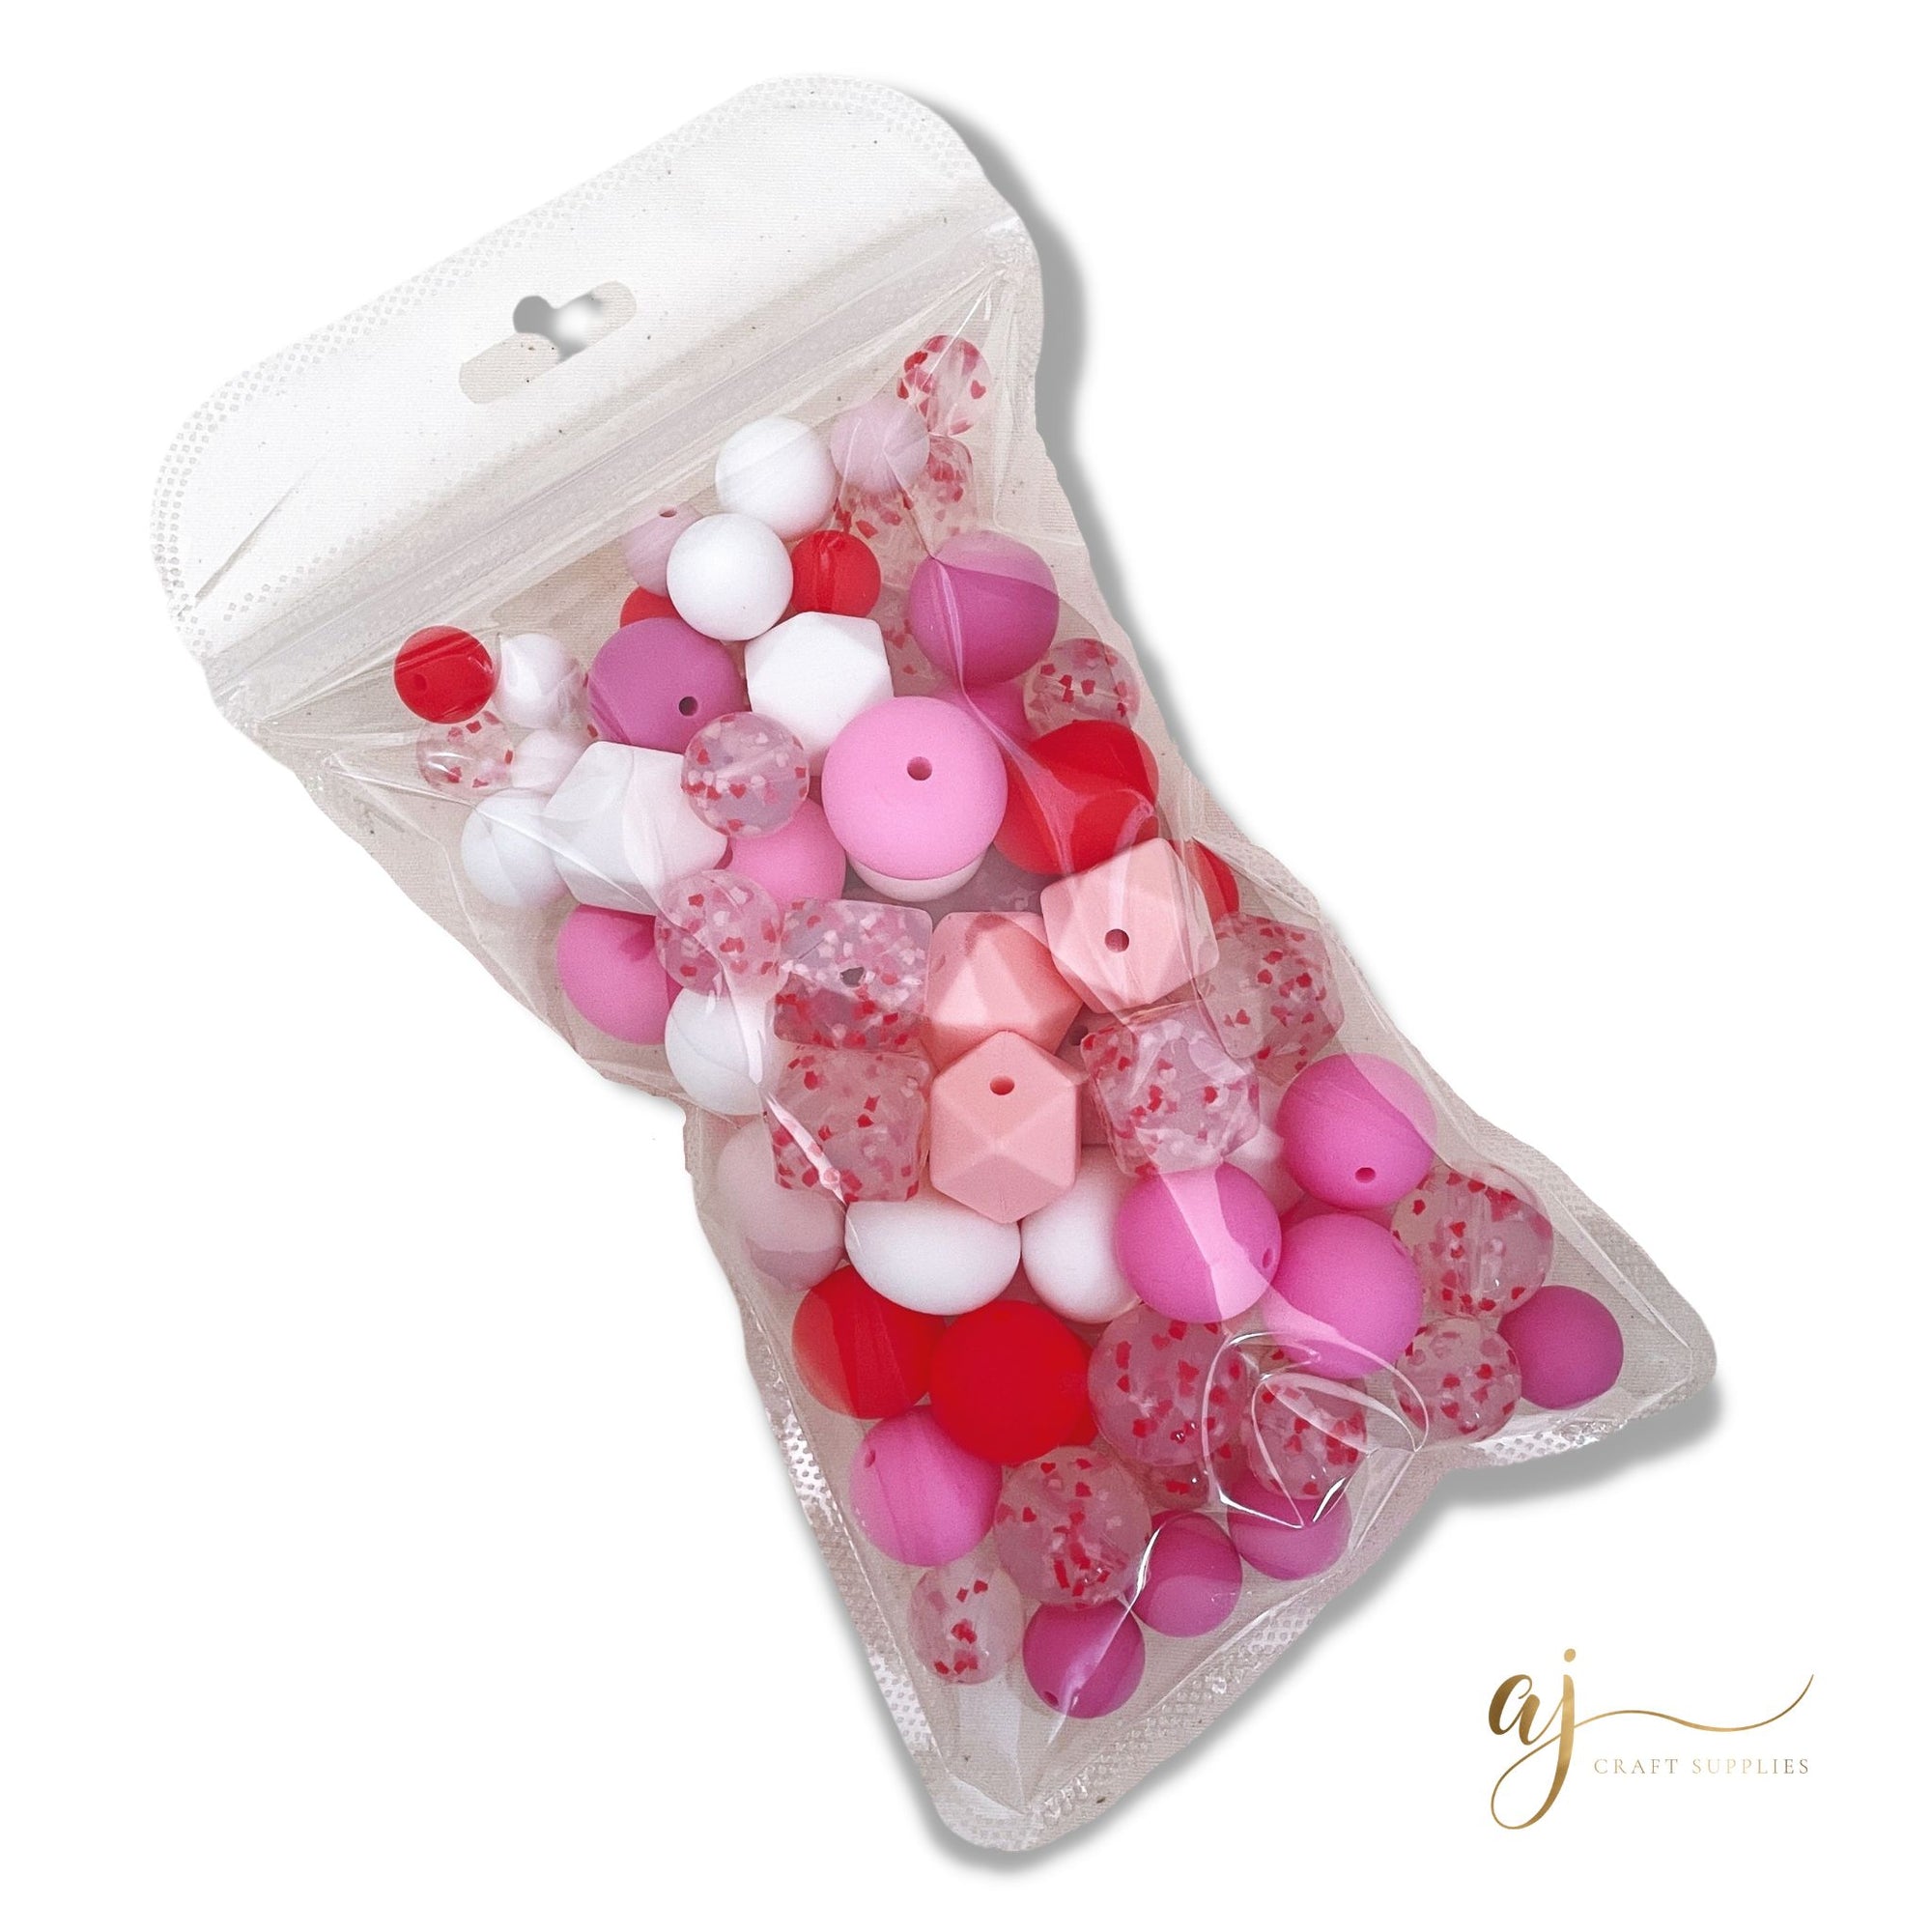 Too Cute Mix , 15mm Round Silicone Bead Mix, Valentine Bead Mix